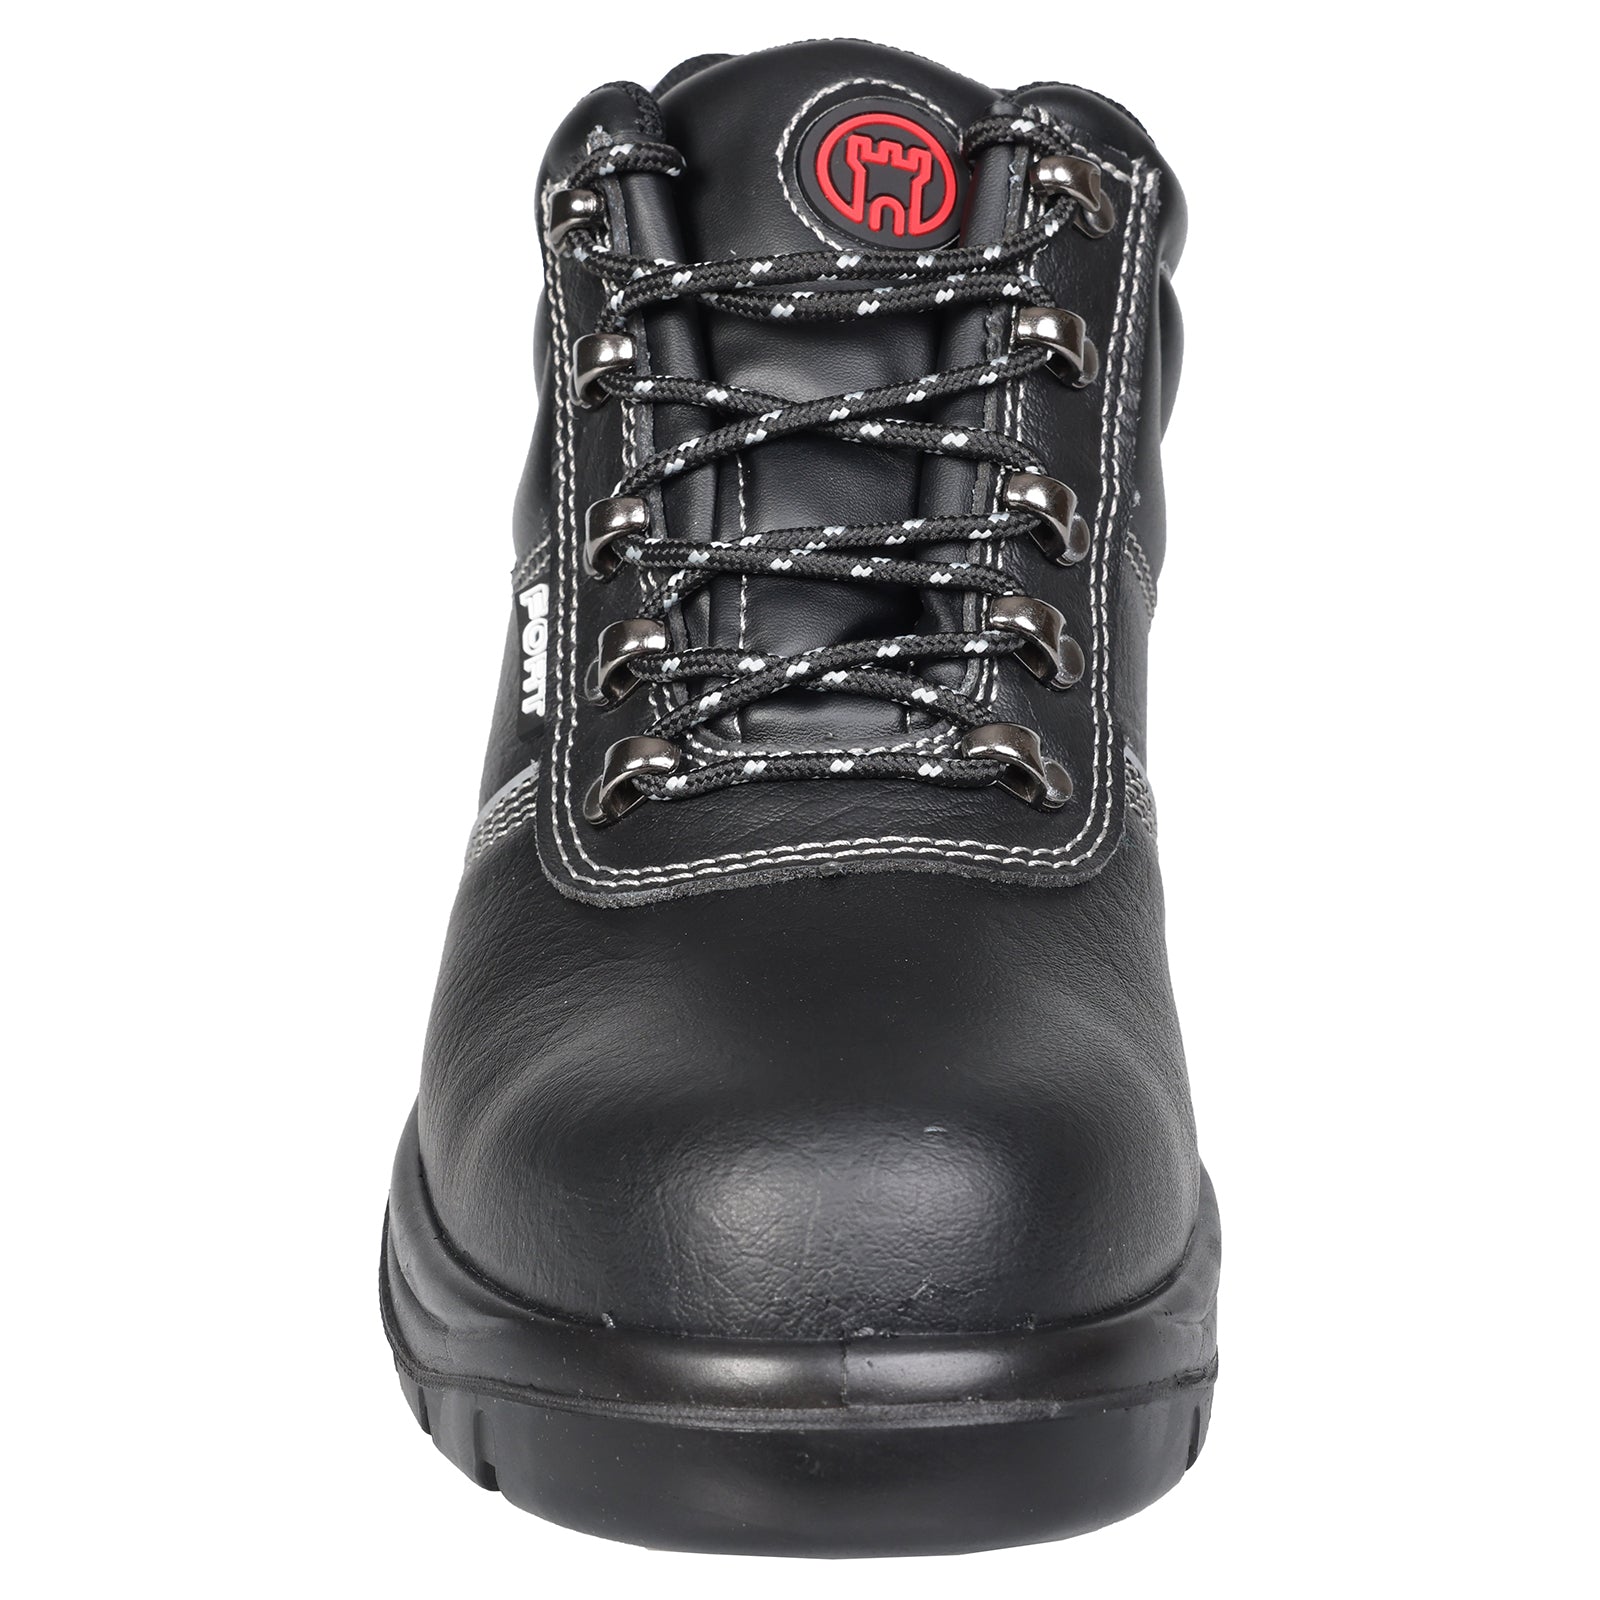 FORT WORKFORCE SAFETY BOOT (FF107)